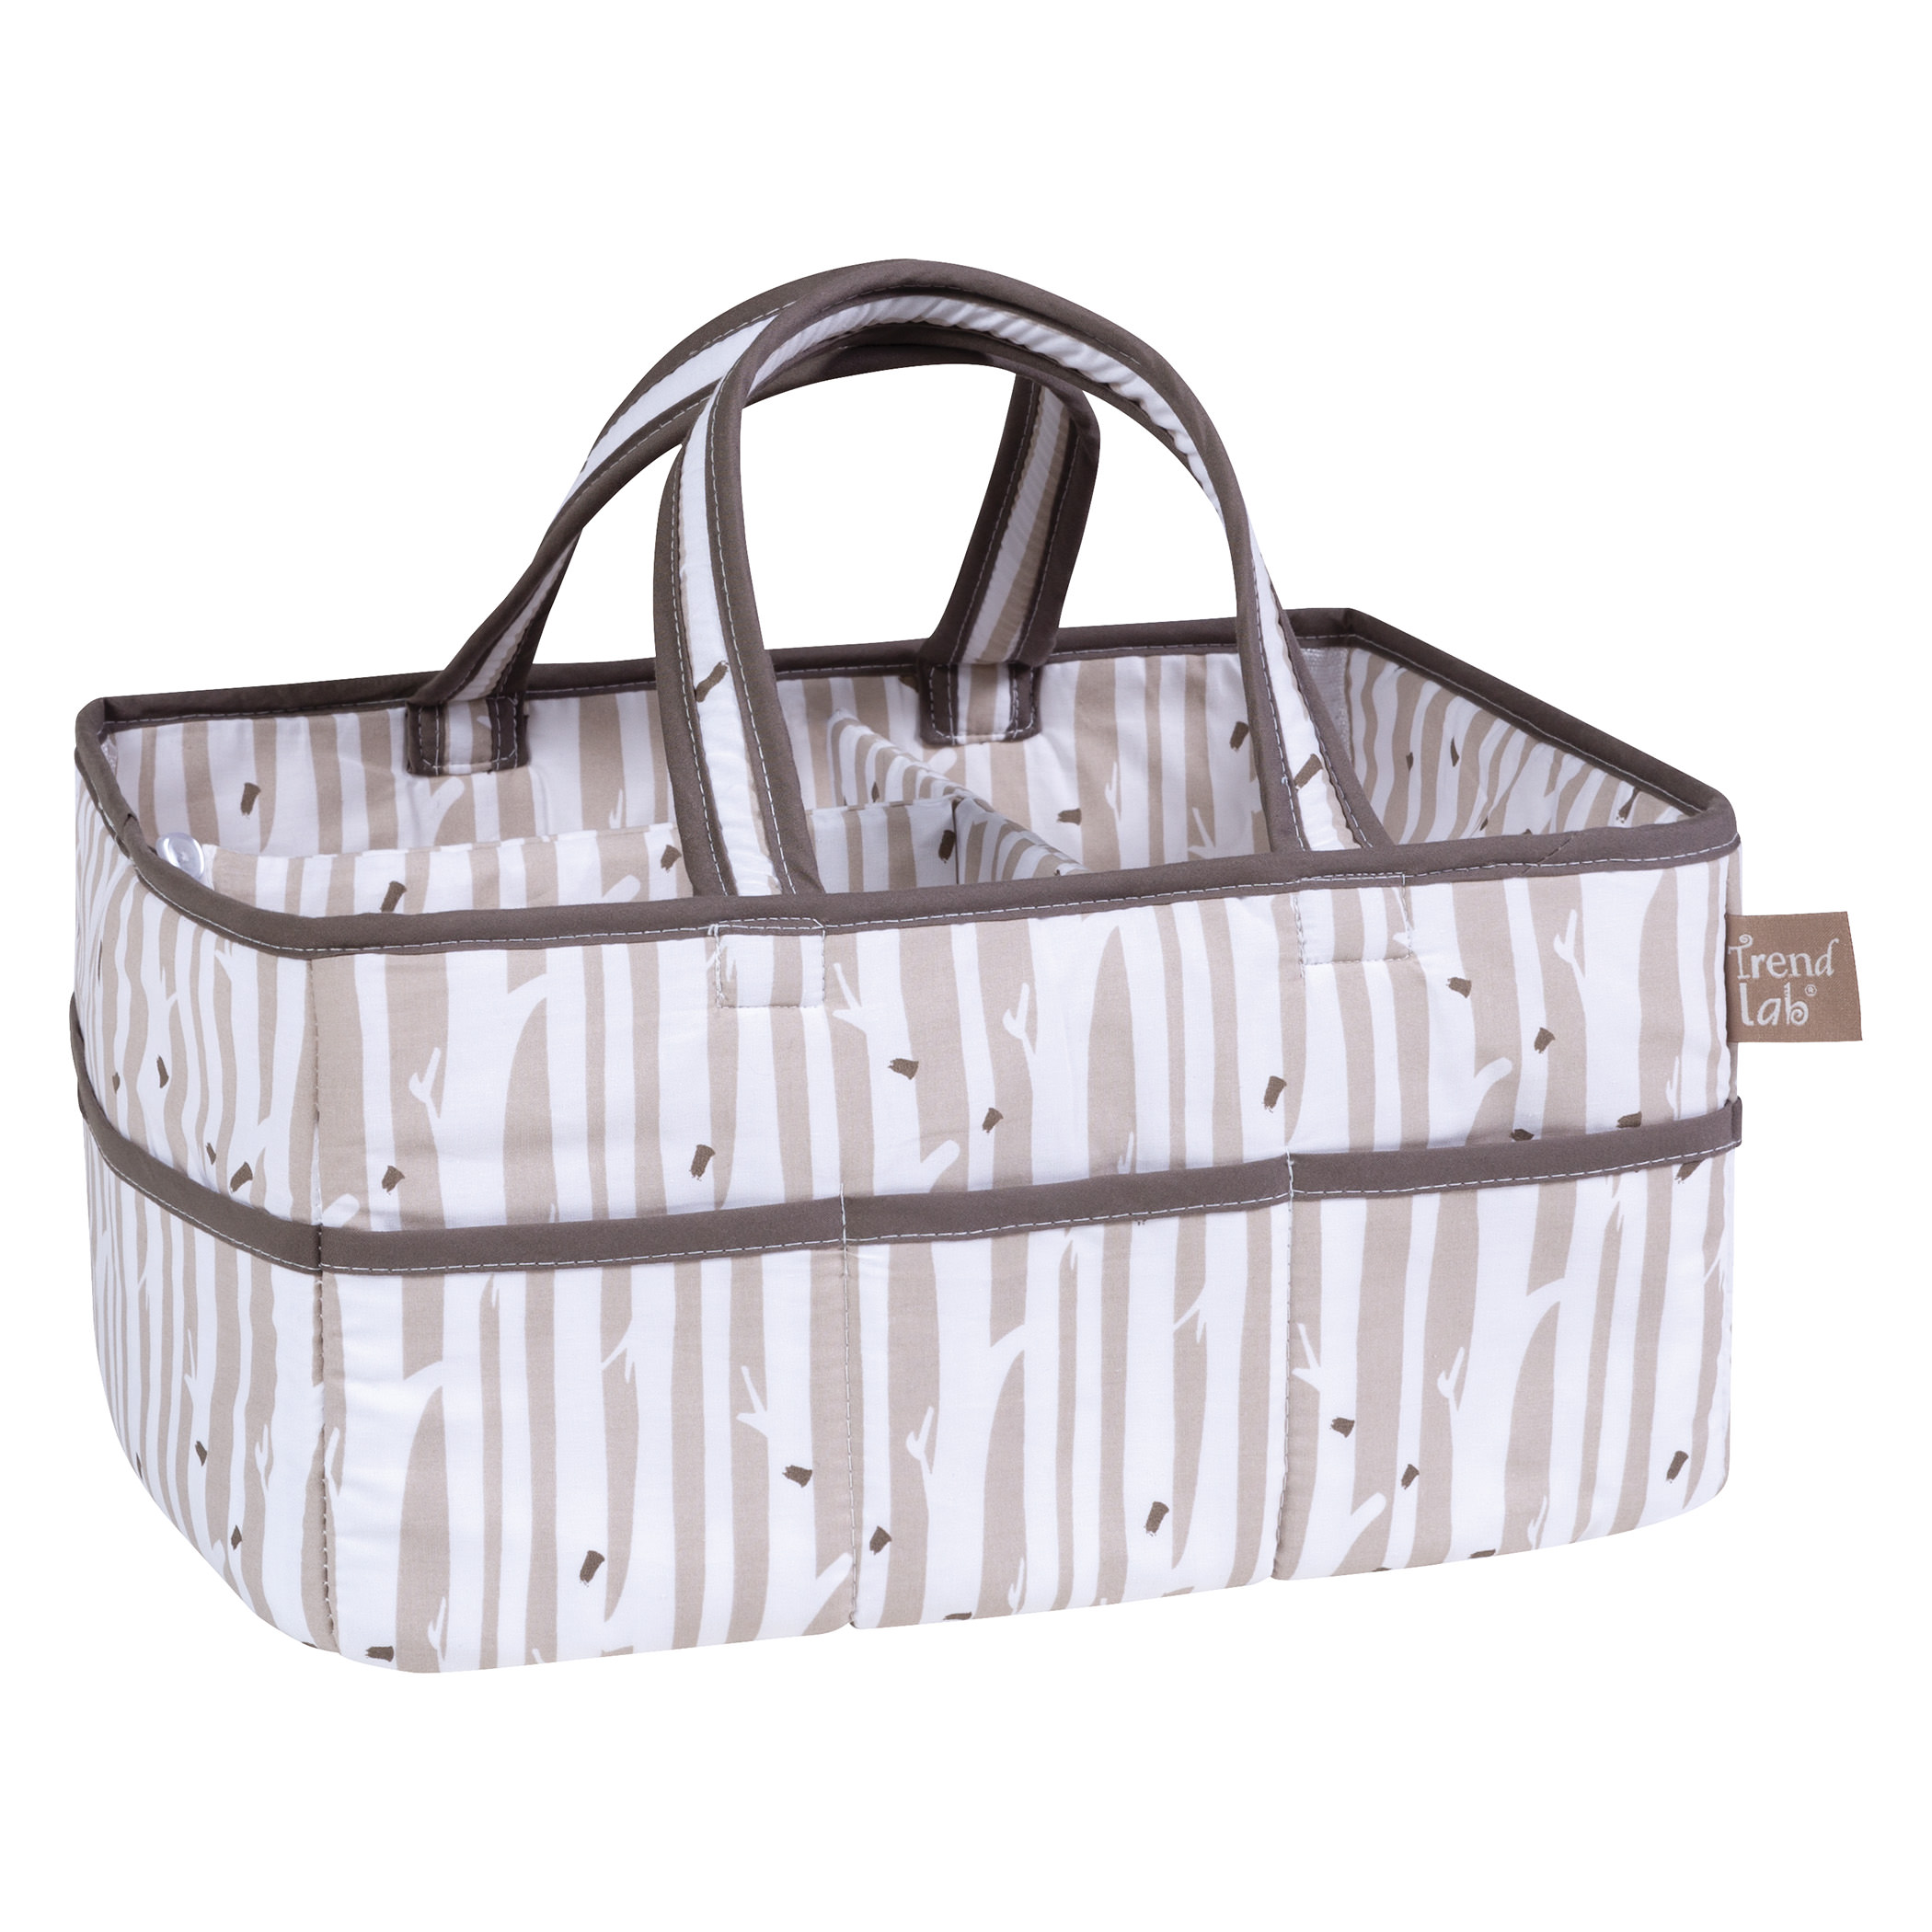 Trend Lab Portable Diaper Caddy, Birch - image 1 of 2